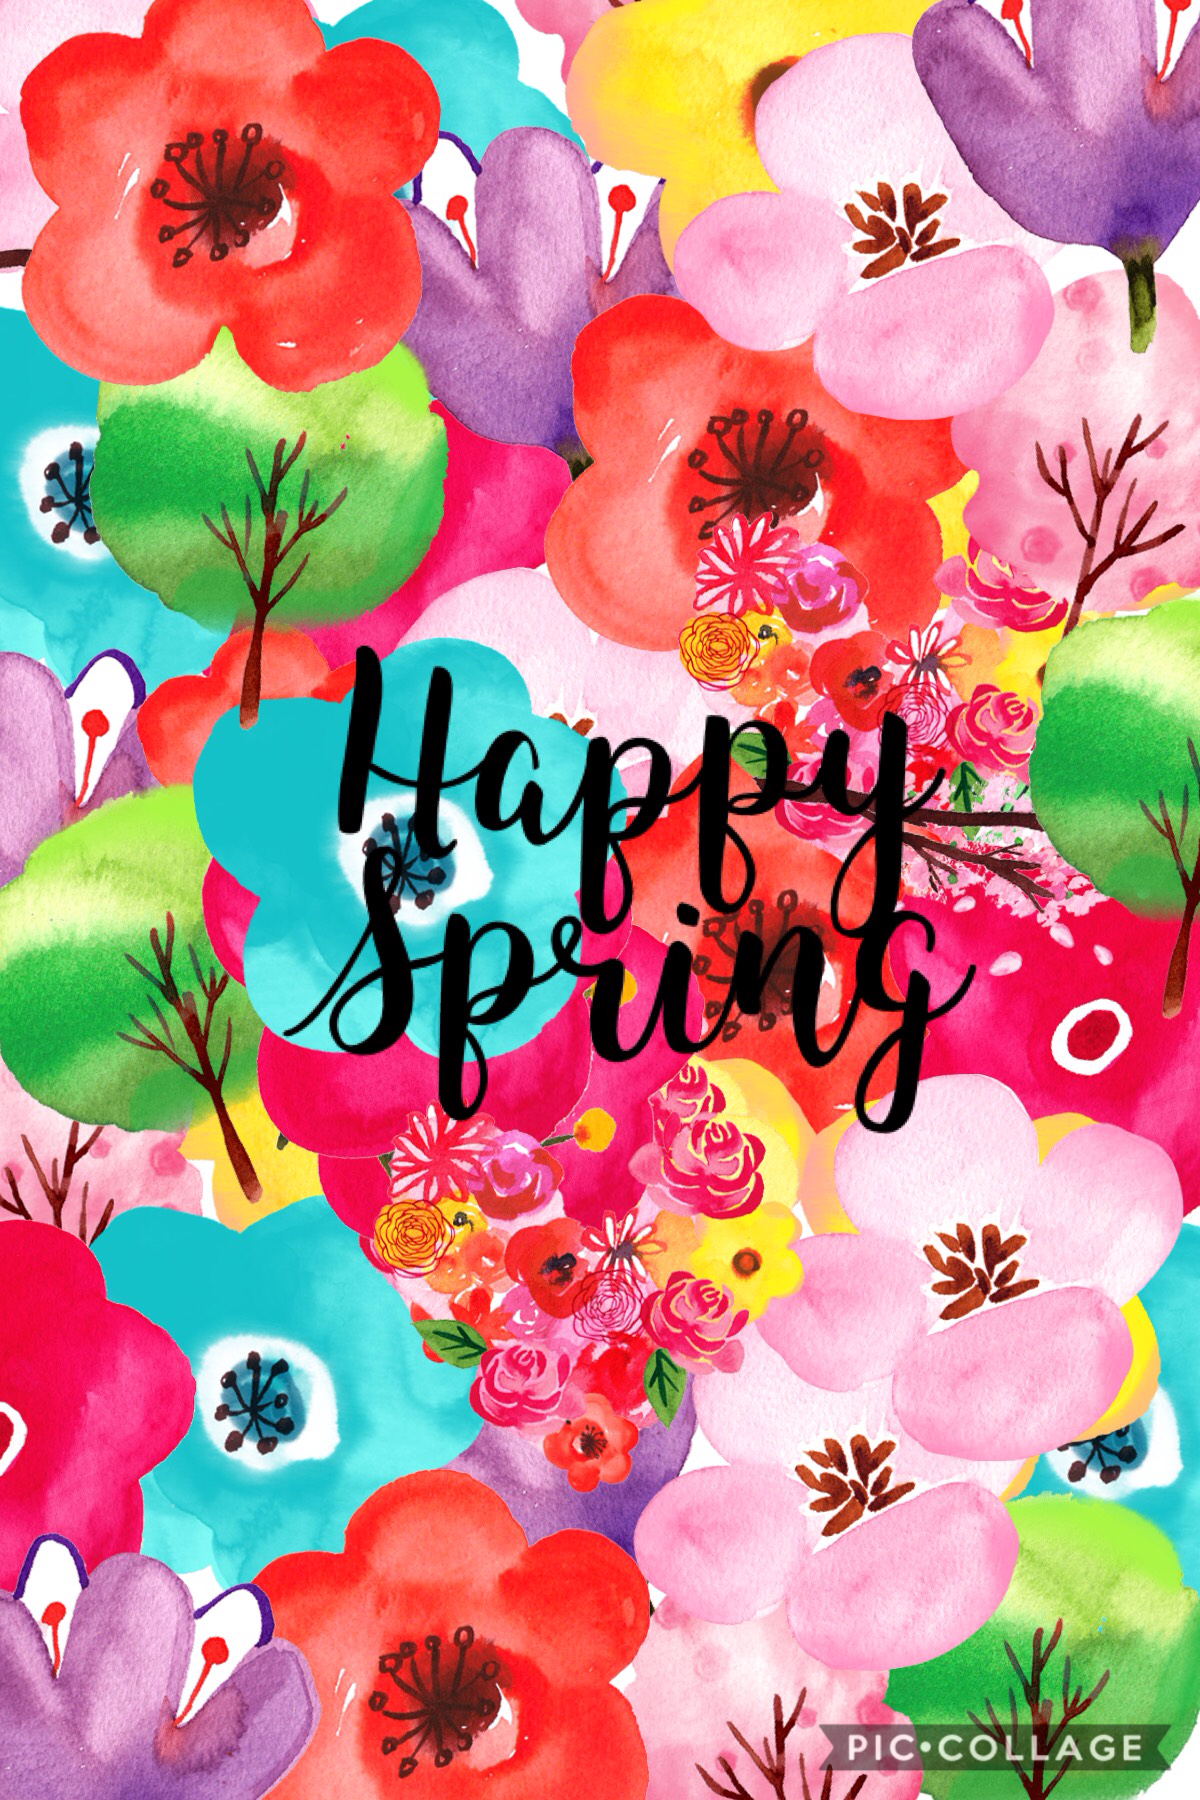 Happy Spring everyone!!!
I'm sorry I haven't been posting much I've just been extremely busy and I just didn't have the time to post. But I'm on Spring break so I have time to post!
As always please like and follow me!!!! Thank you!!!